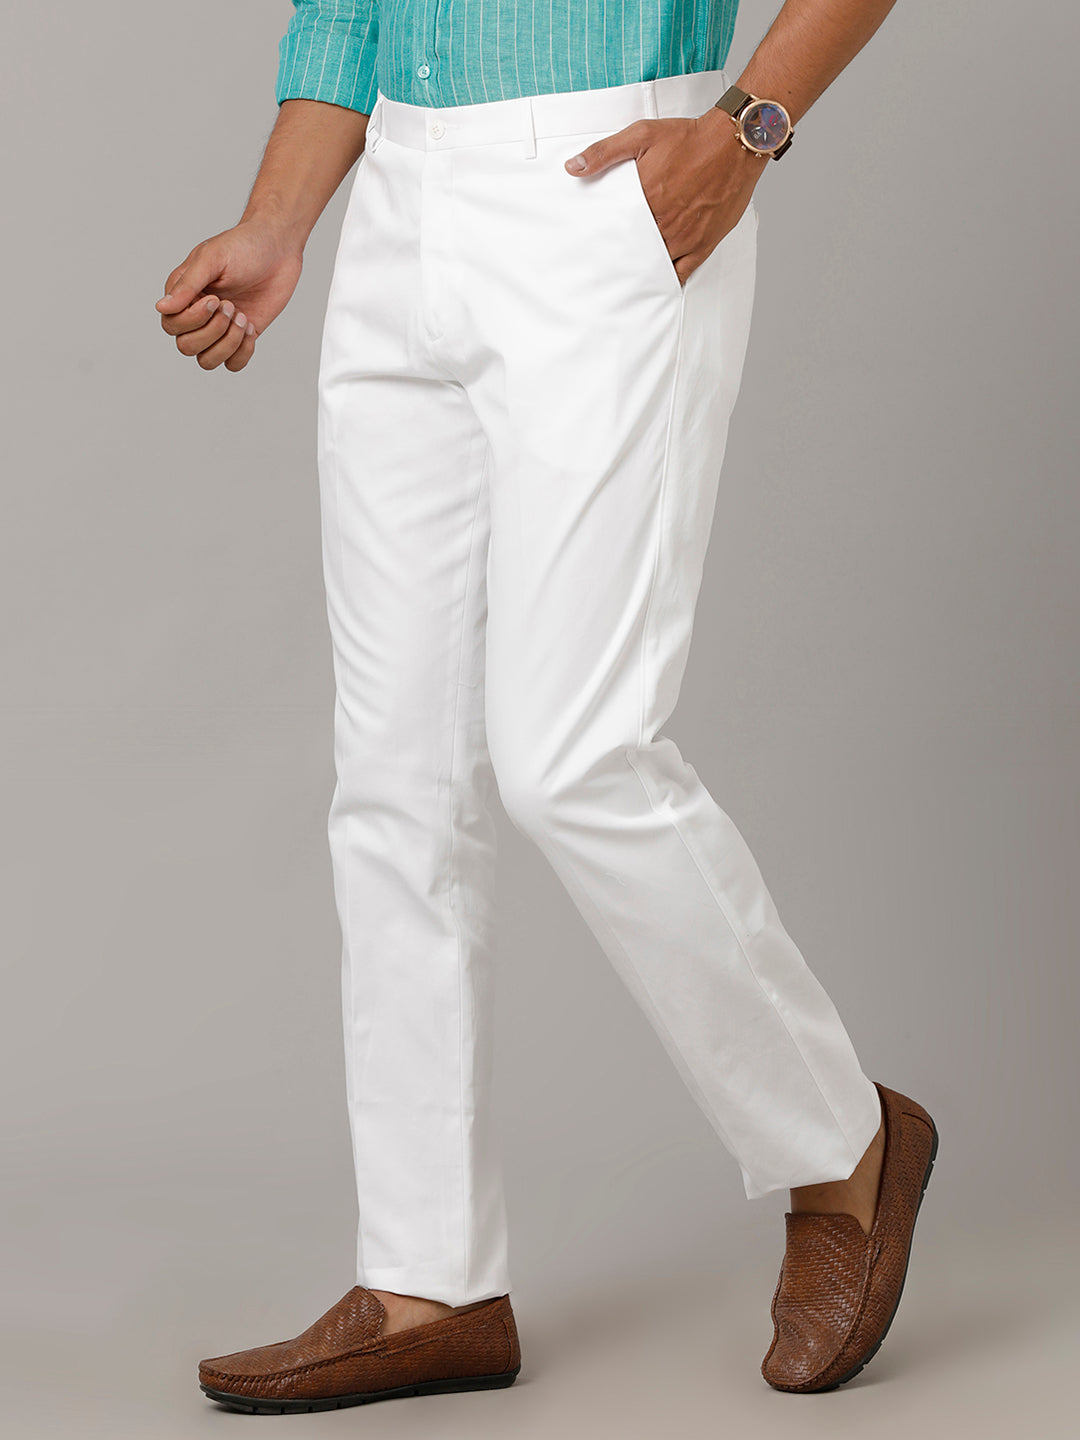 Mens Regular Fit Cotton White Pants Easy Care-Side view